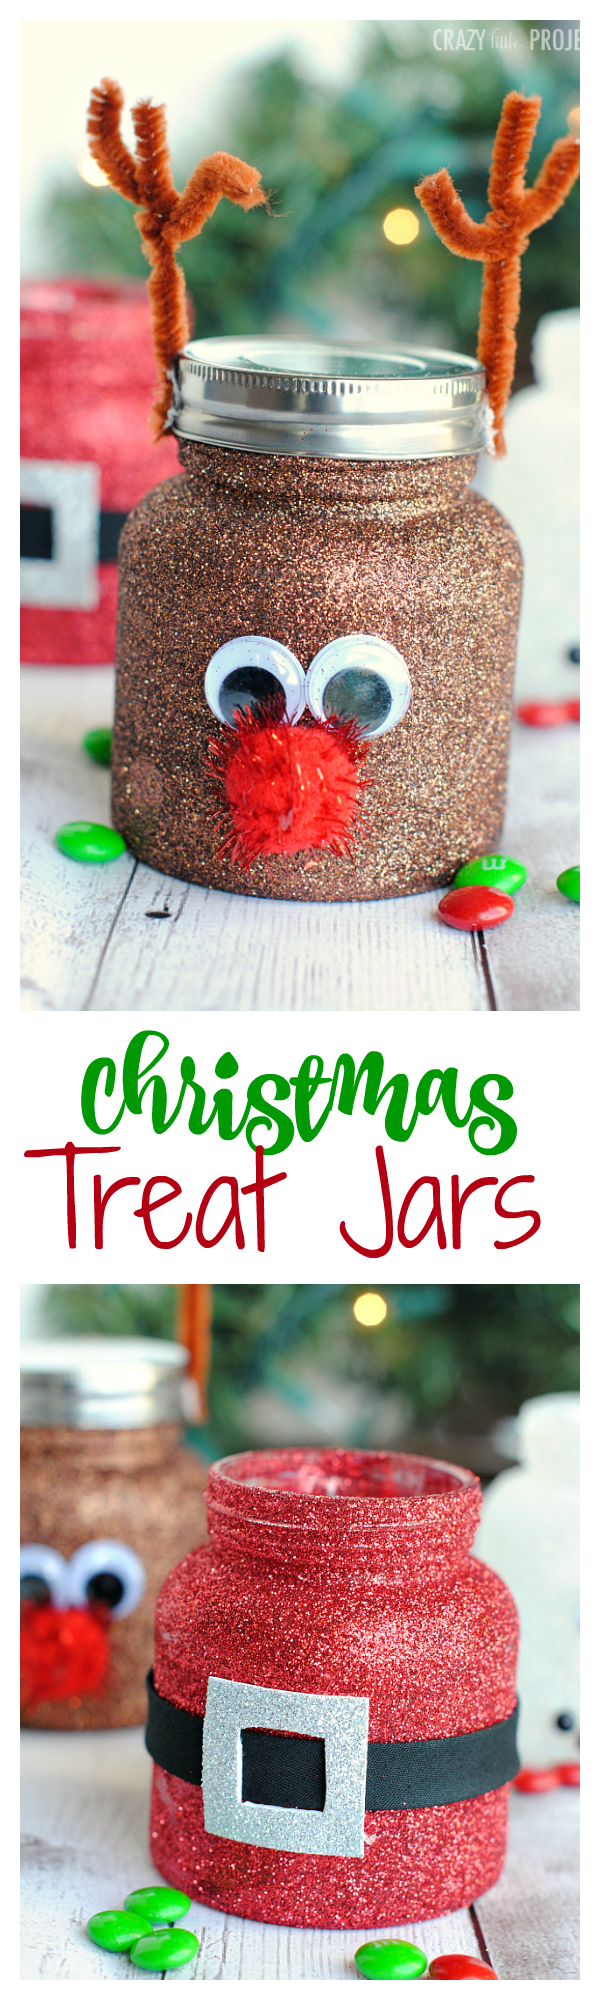 Christmas Treat Jars-Cute Mason Jar Crafts for Kids - Crazy Little Projects